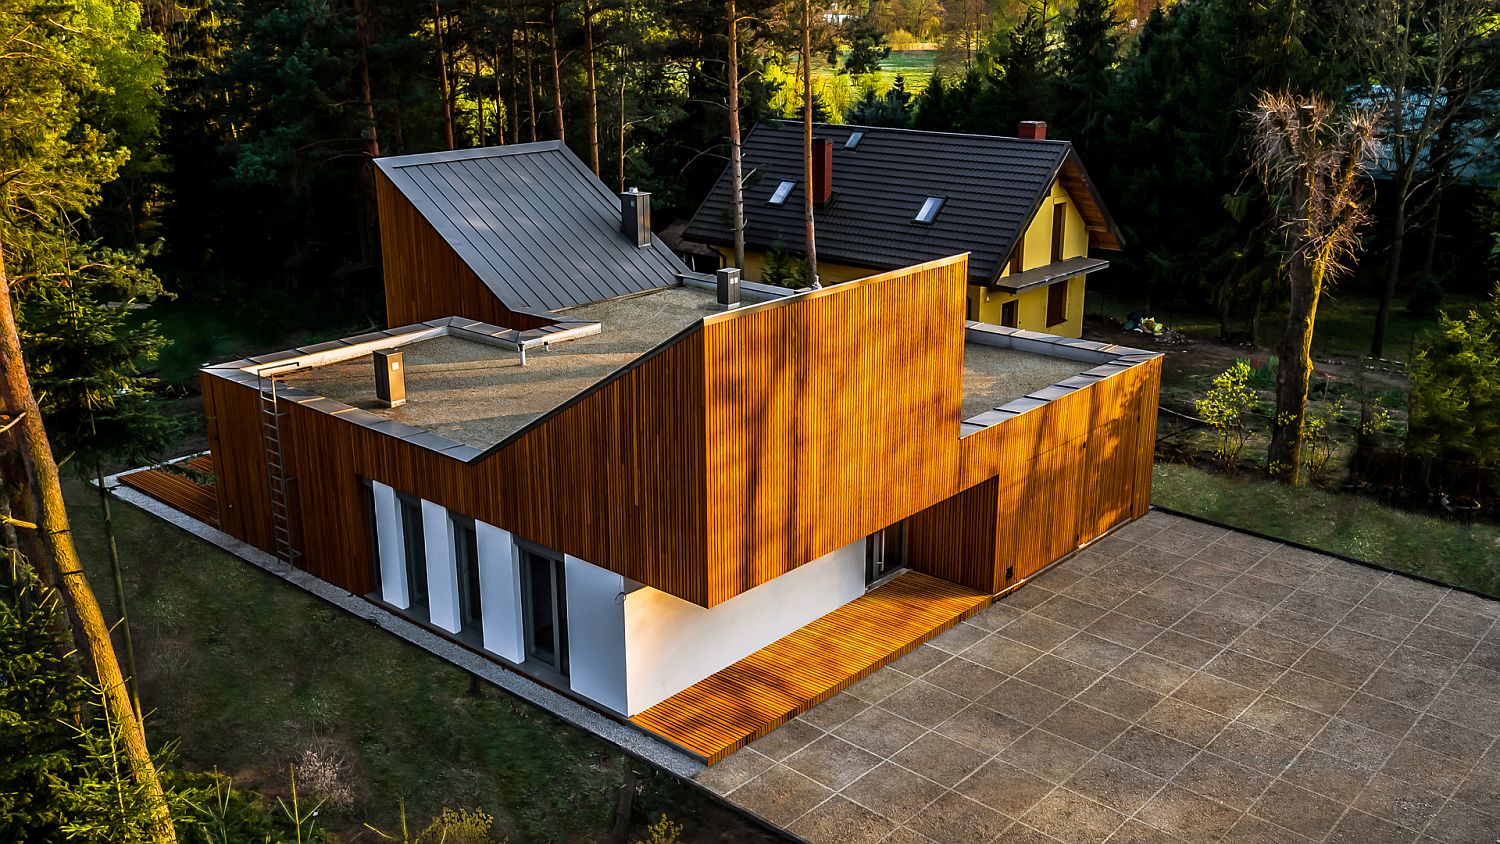 Sloped-roofs-and-wooden-cladding-of-the-home-gives-it-a-unique-look